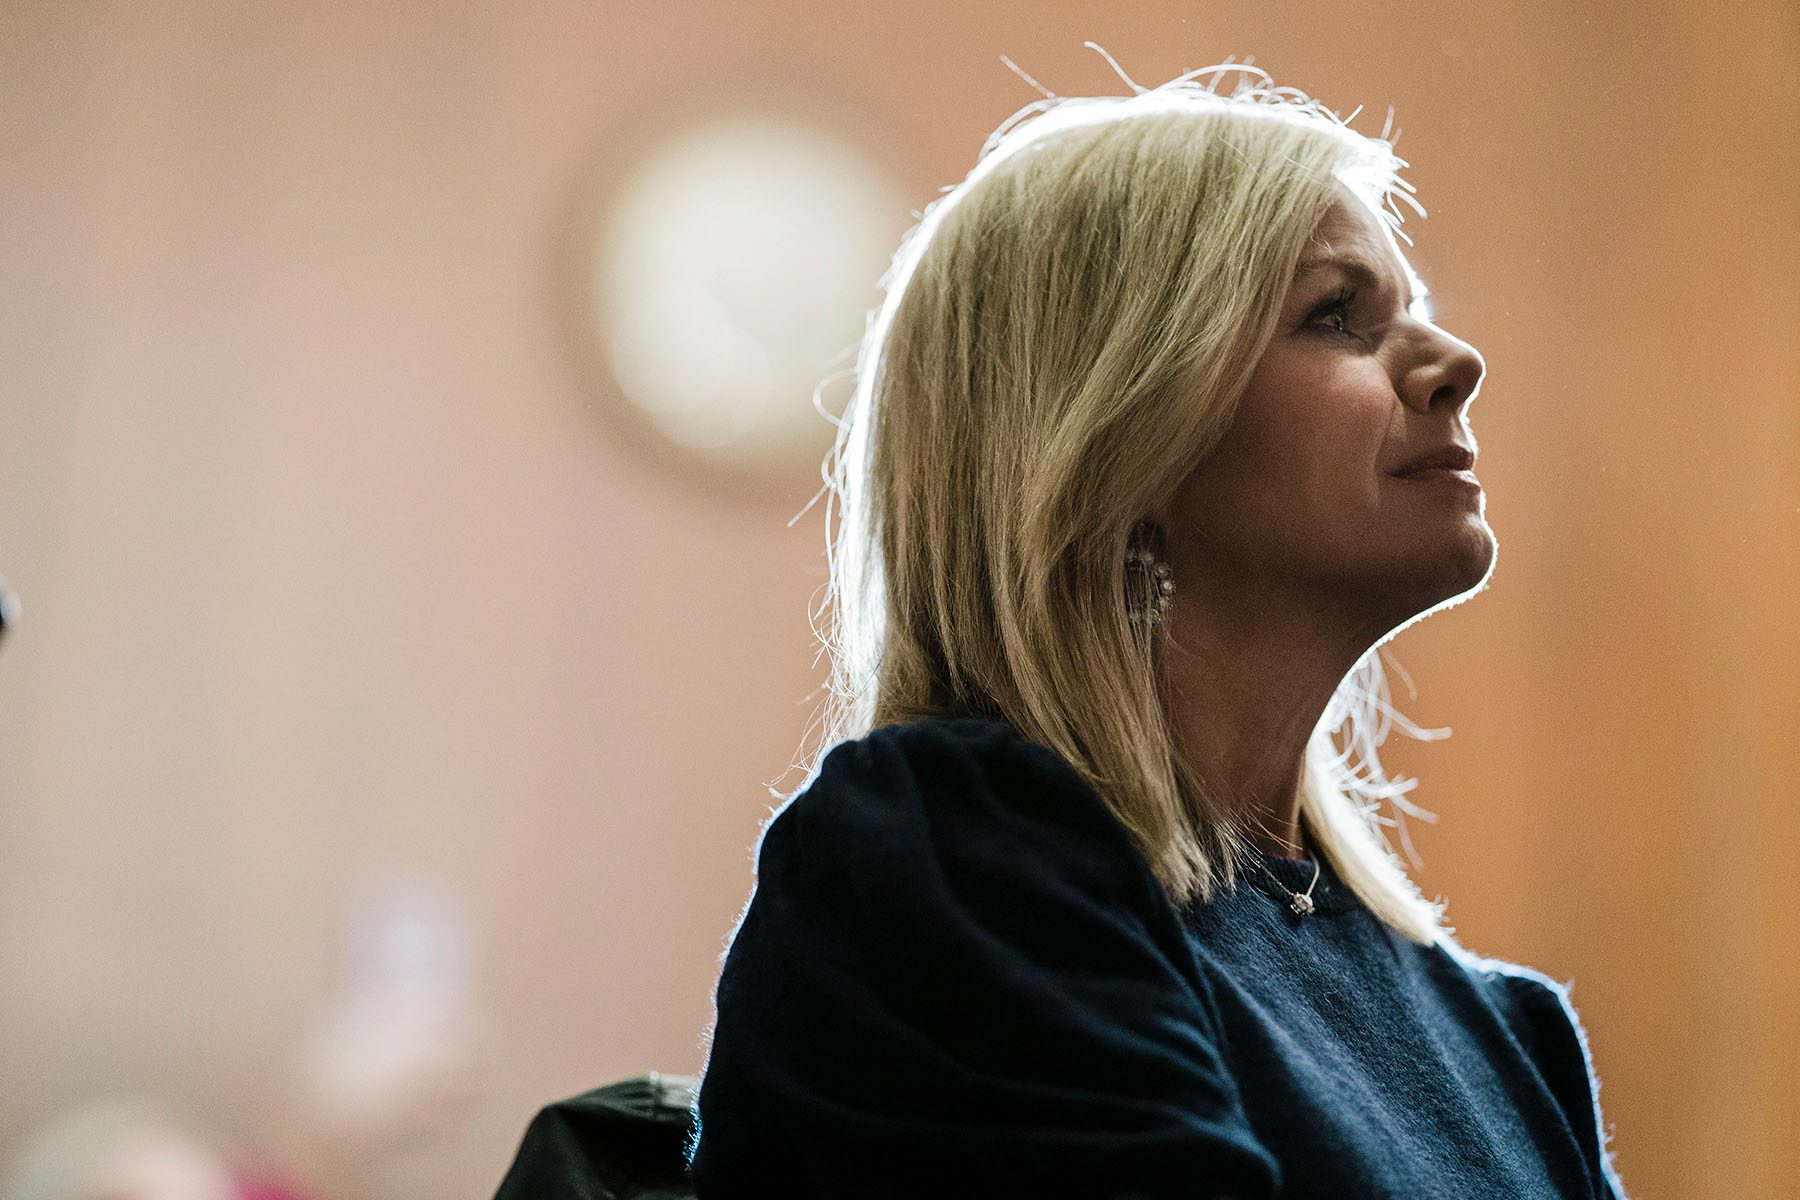 Former Fox News anchor Gretchen Carlson looks emotional during a news conference.